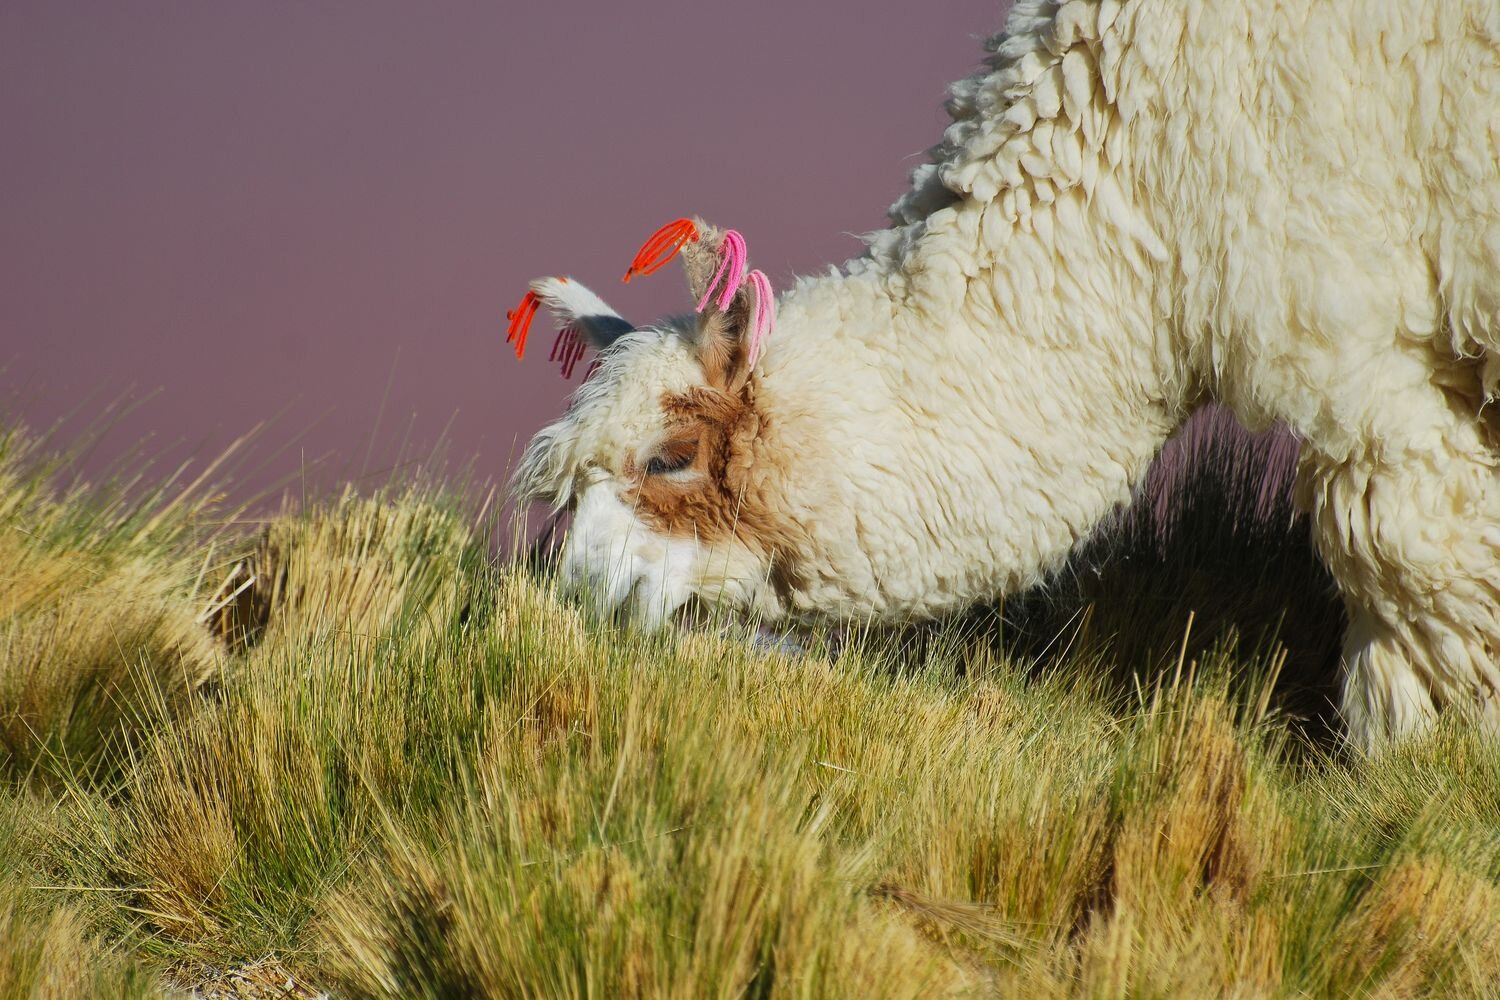  Lama grazing in the Andean highlands 